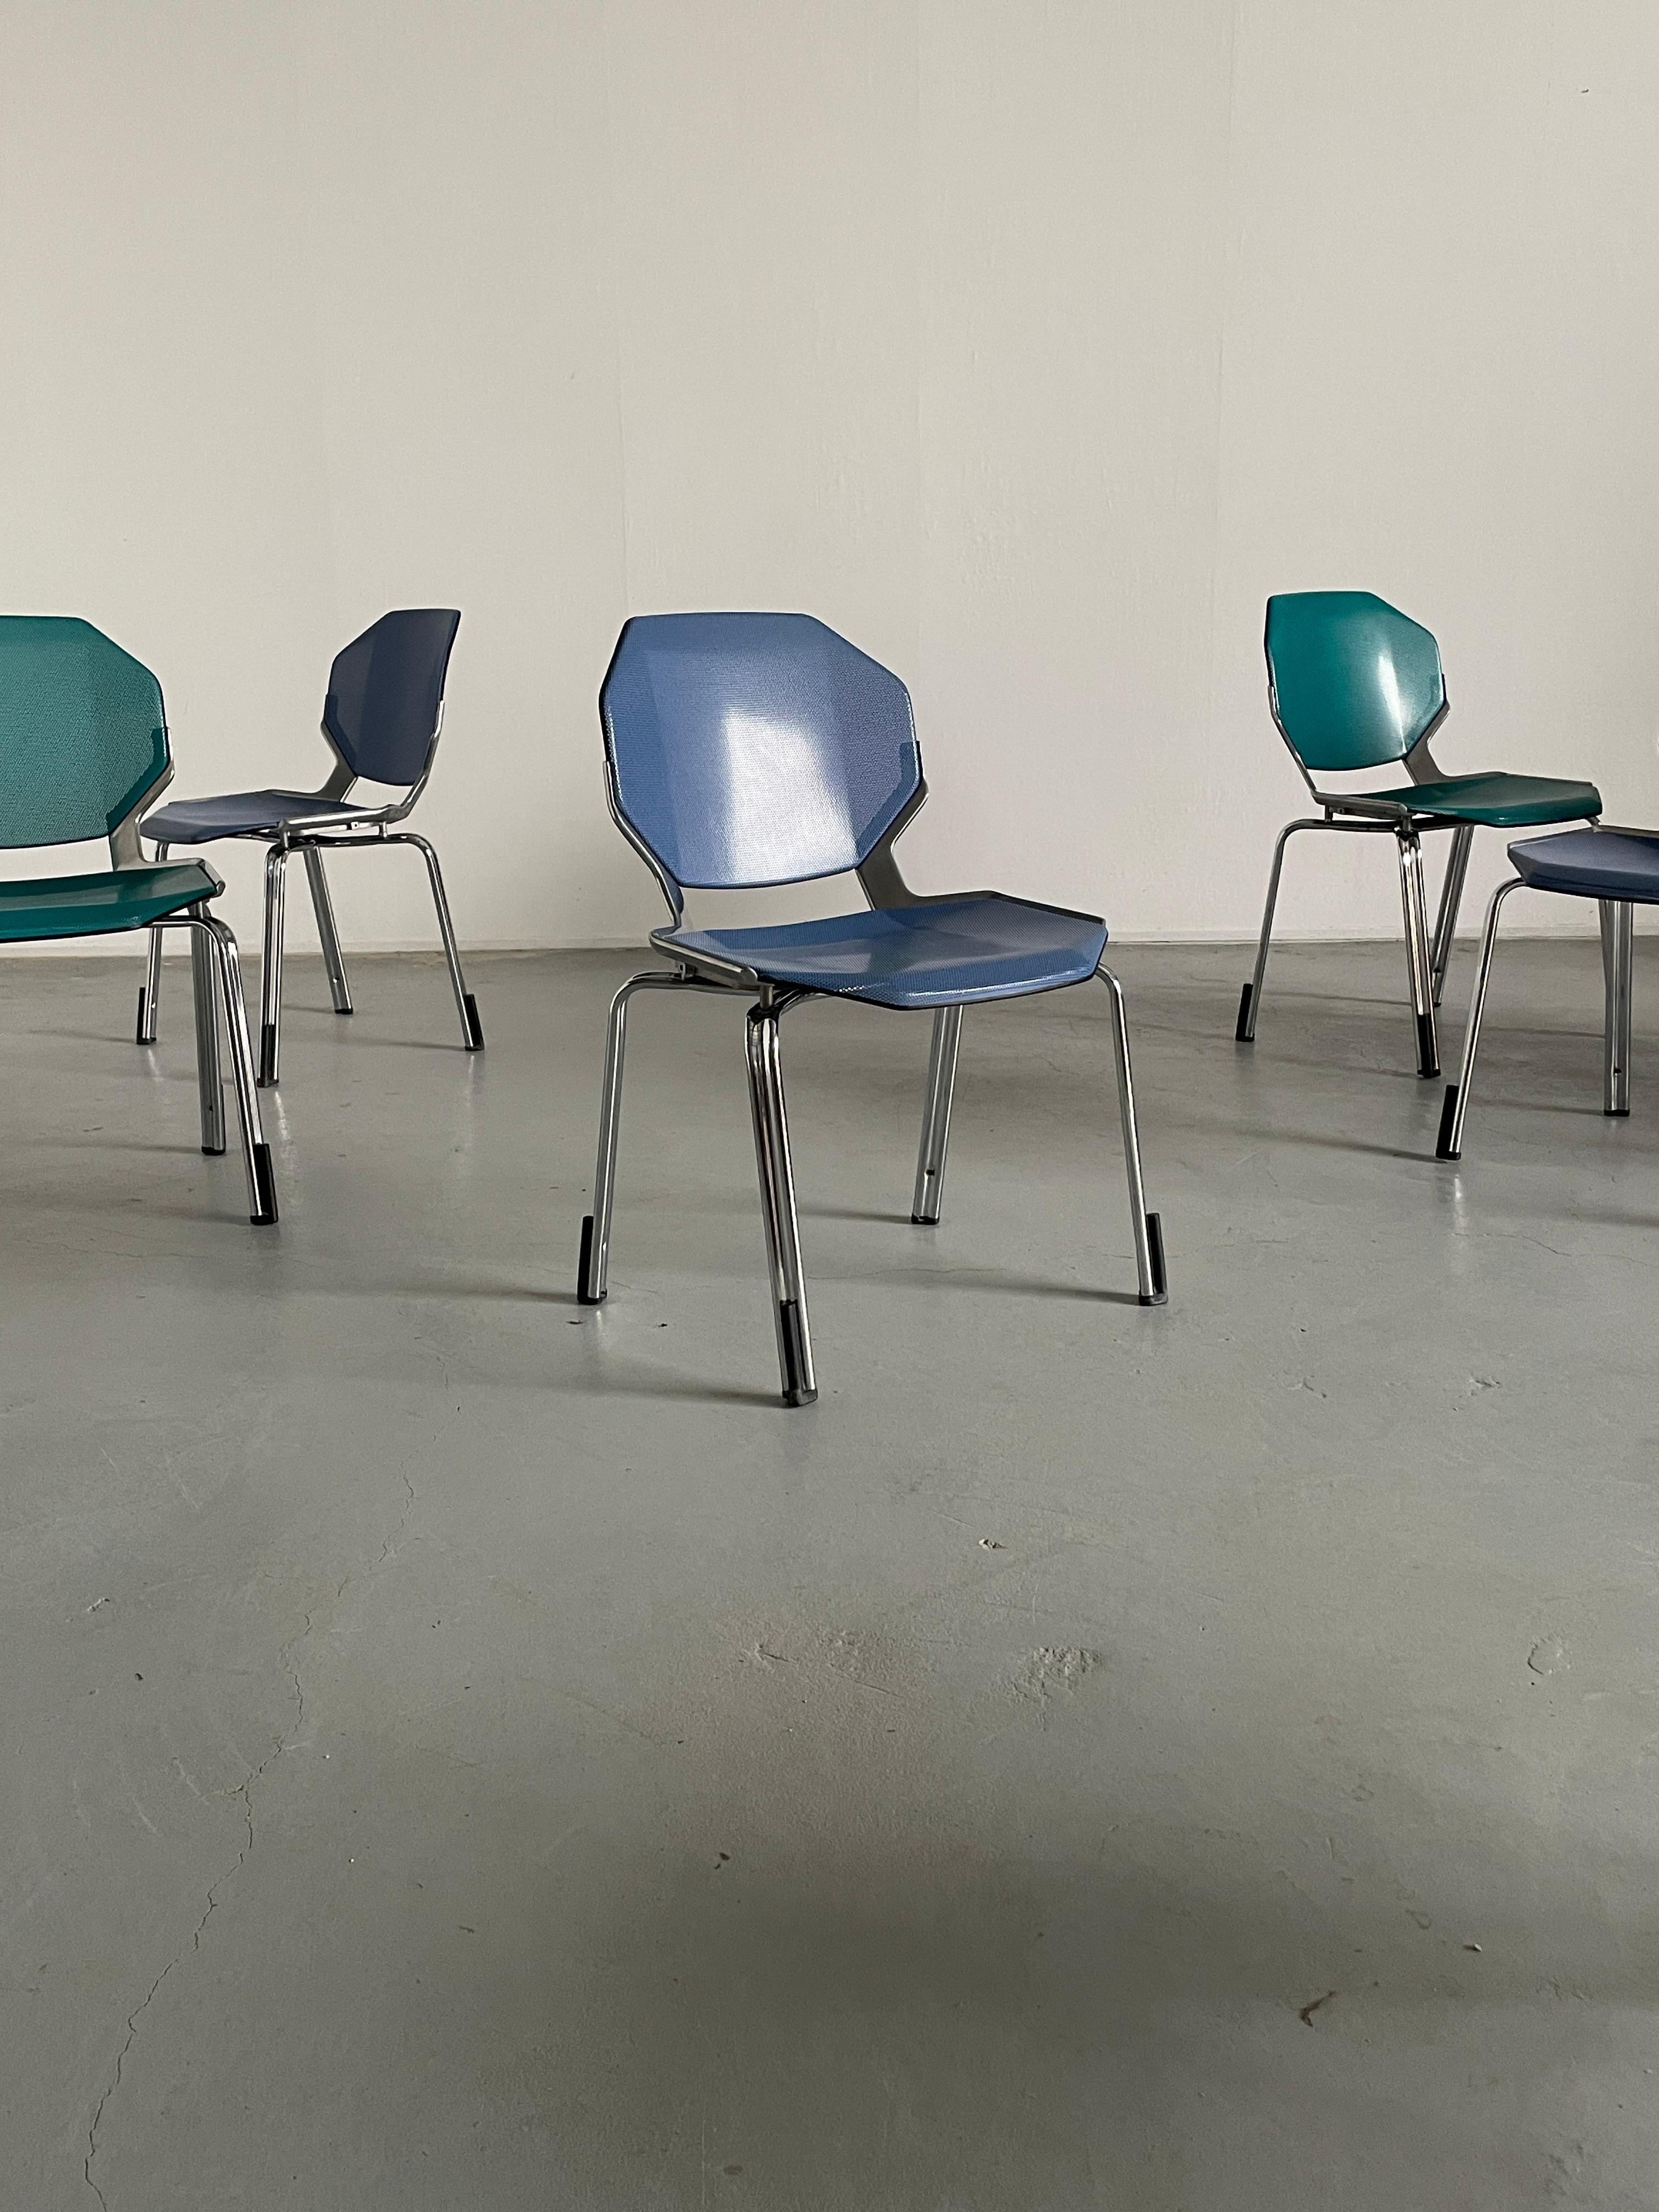 Space Age Futuristic Octagonal Stackable Dining Chairs by Fröscher Sitform, 90s For Sale 9